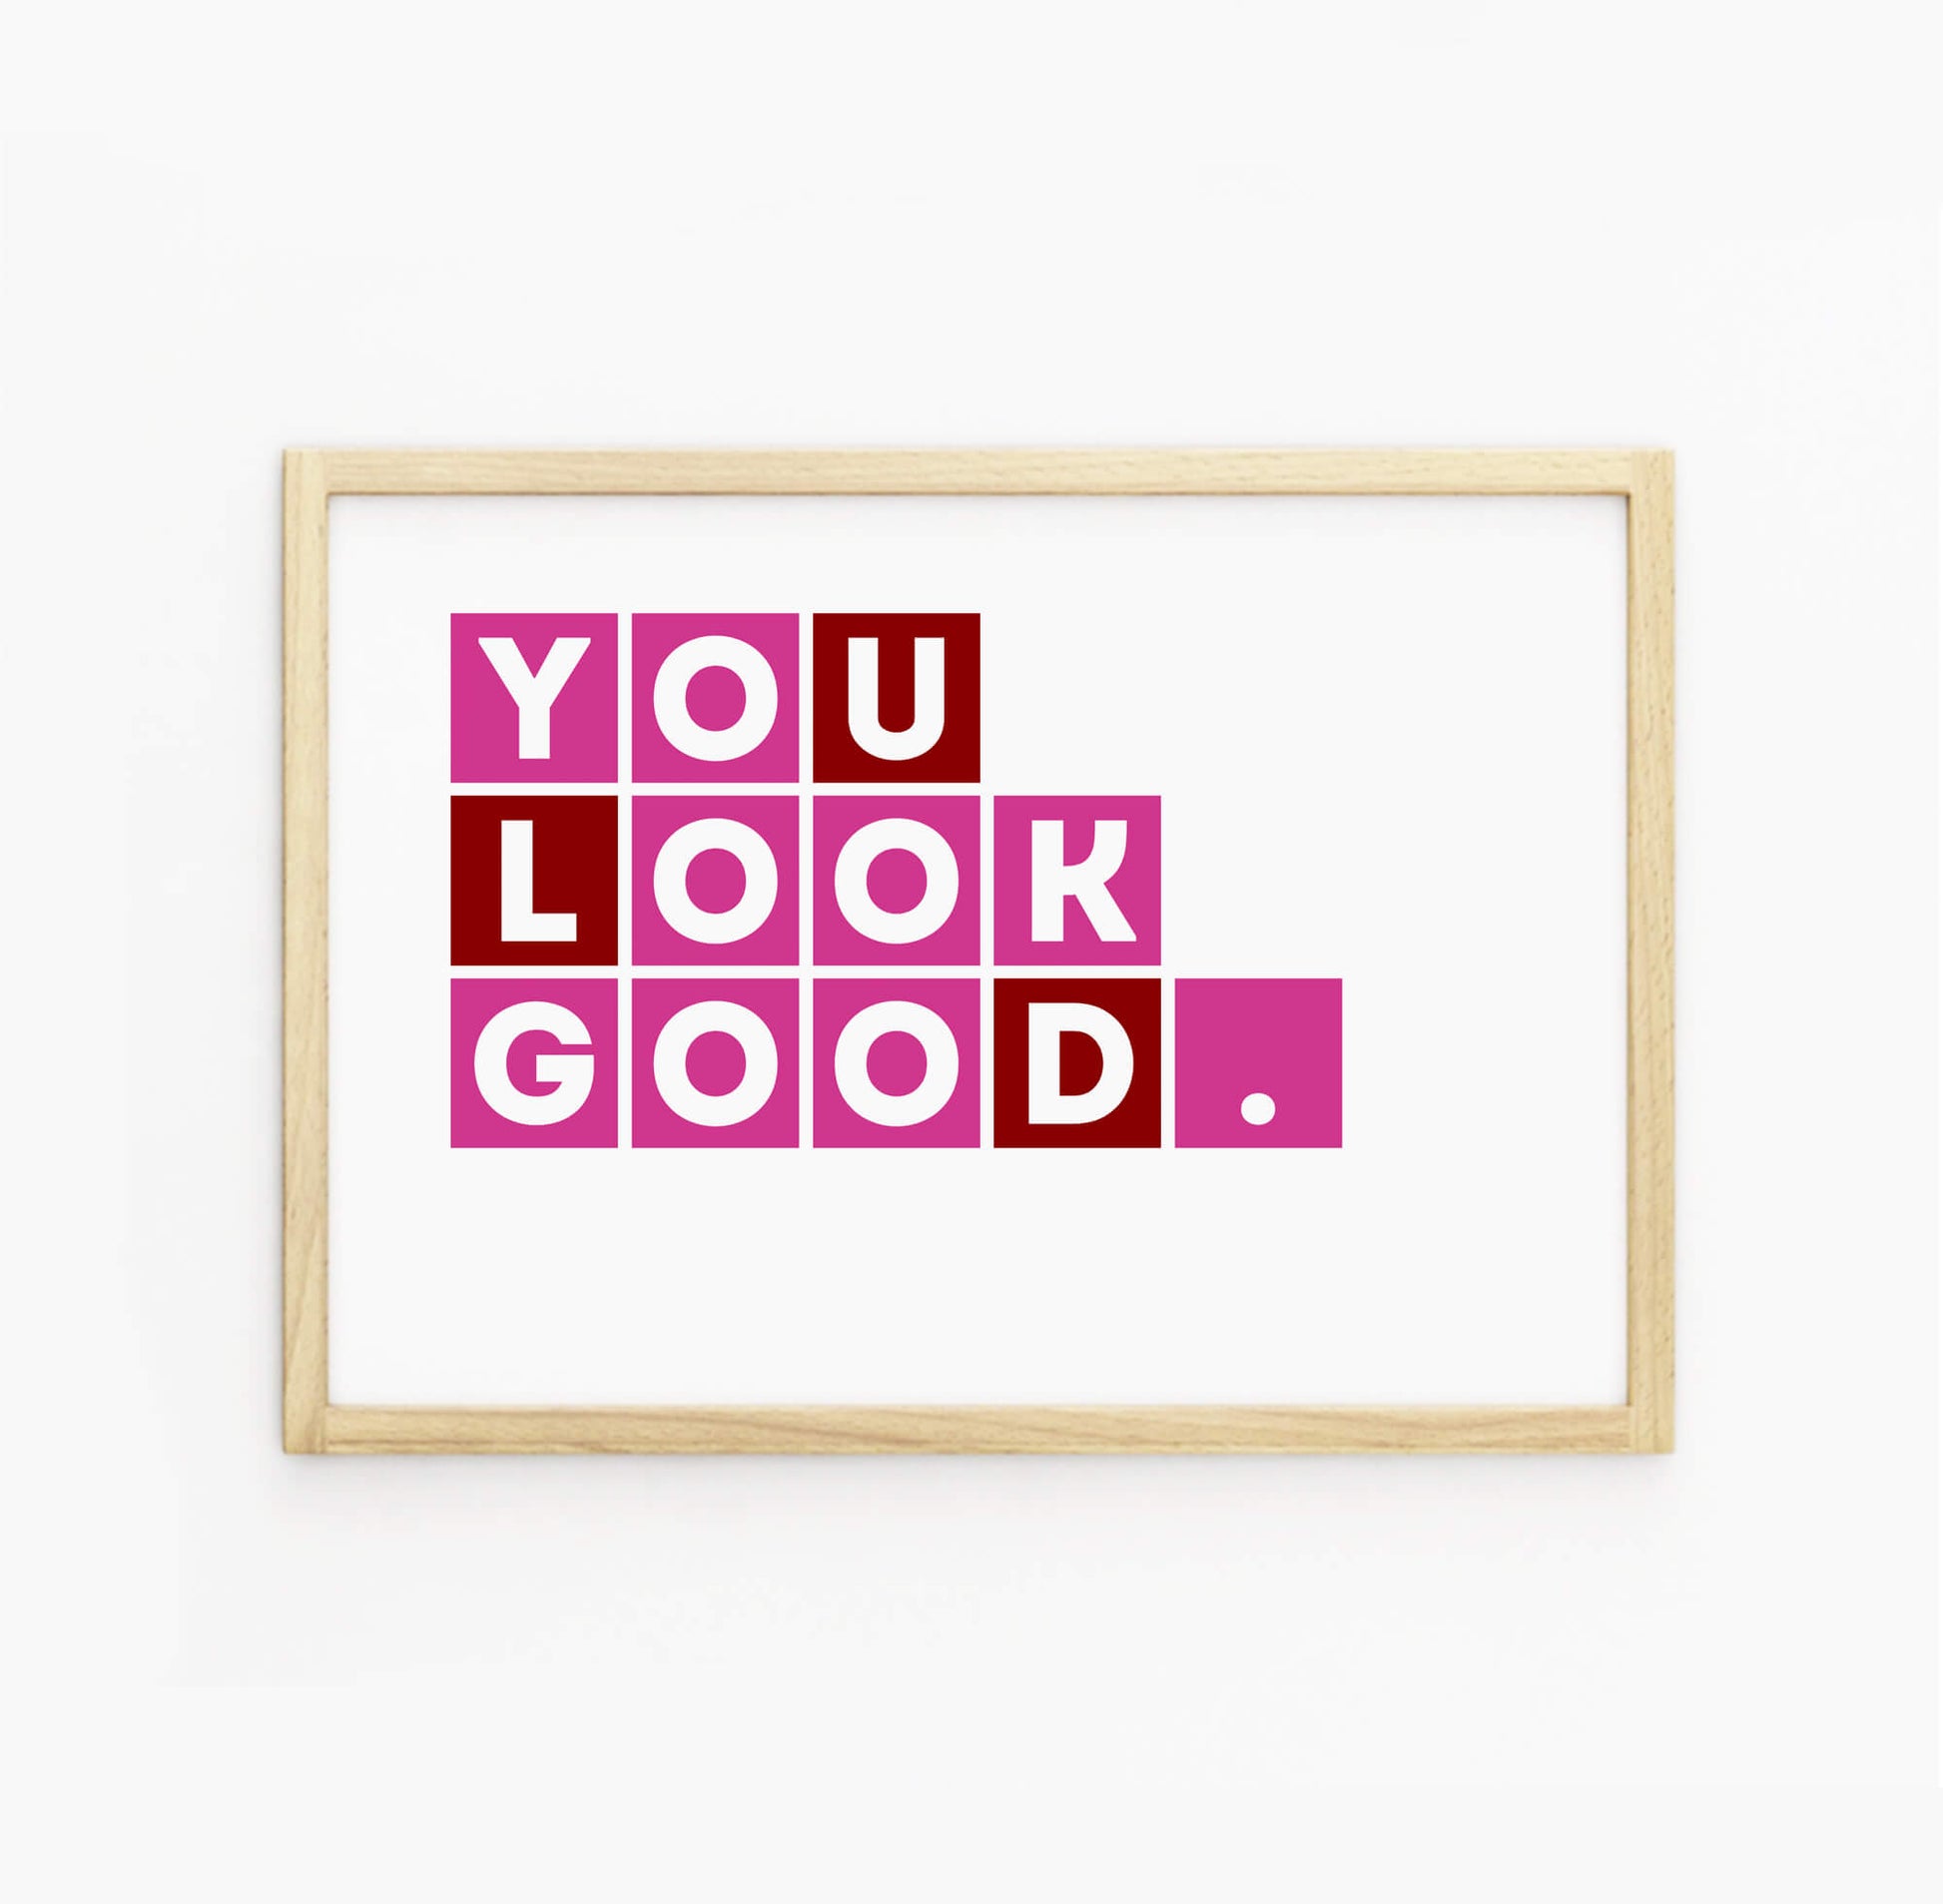 You Look Good Print-SixElevenCreations-SEL0005A5